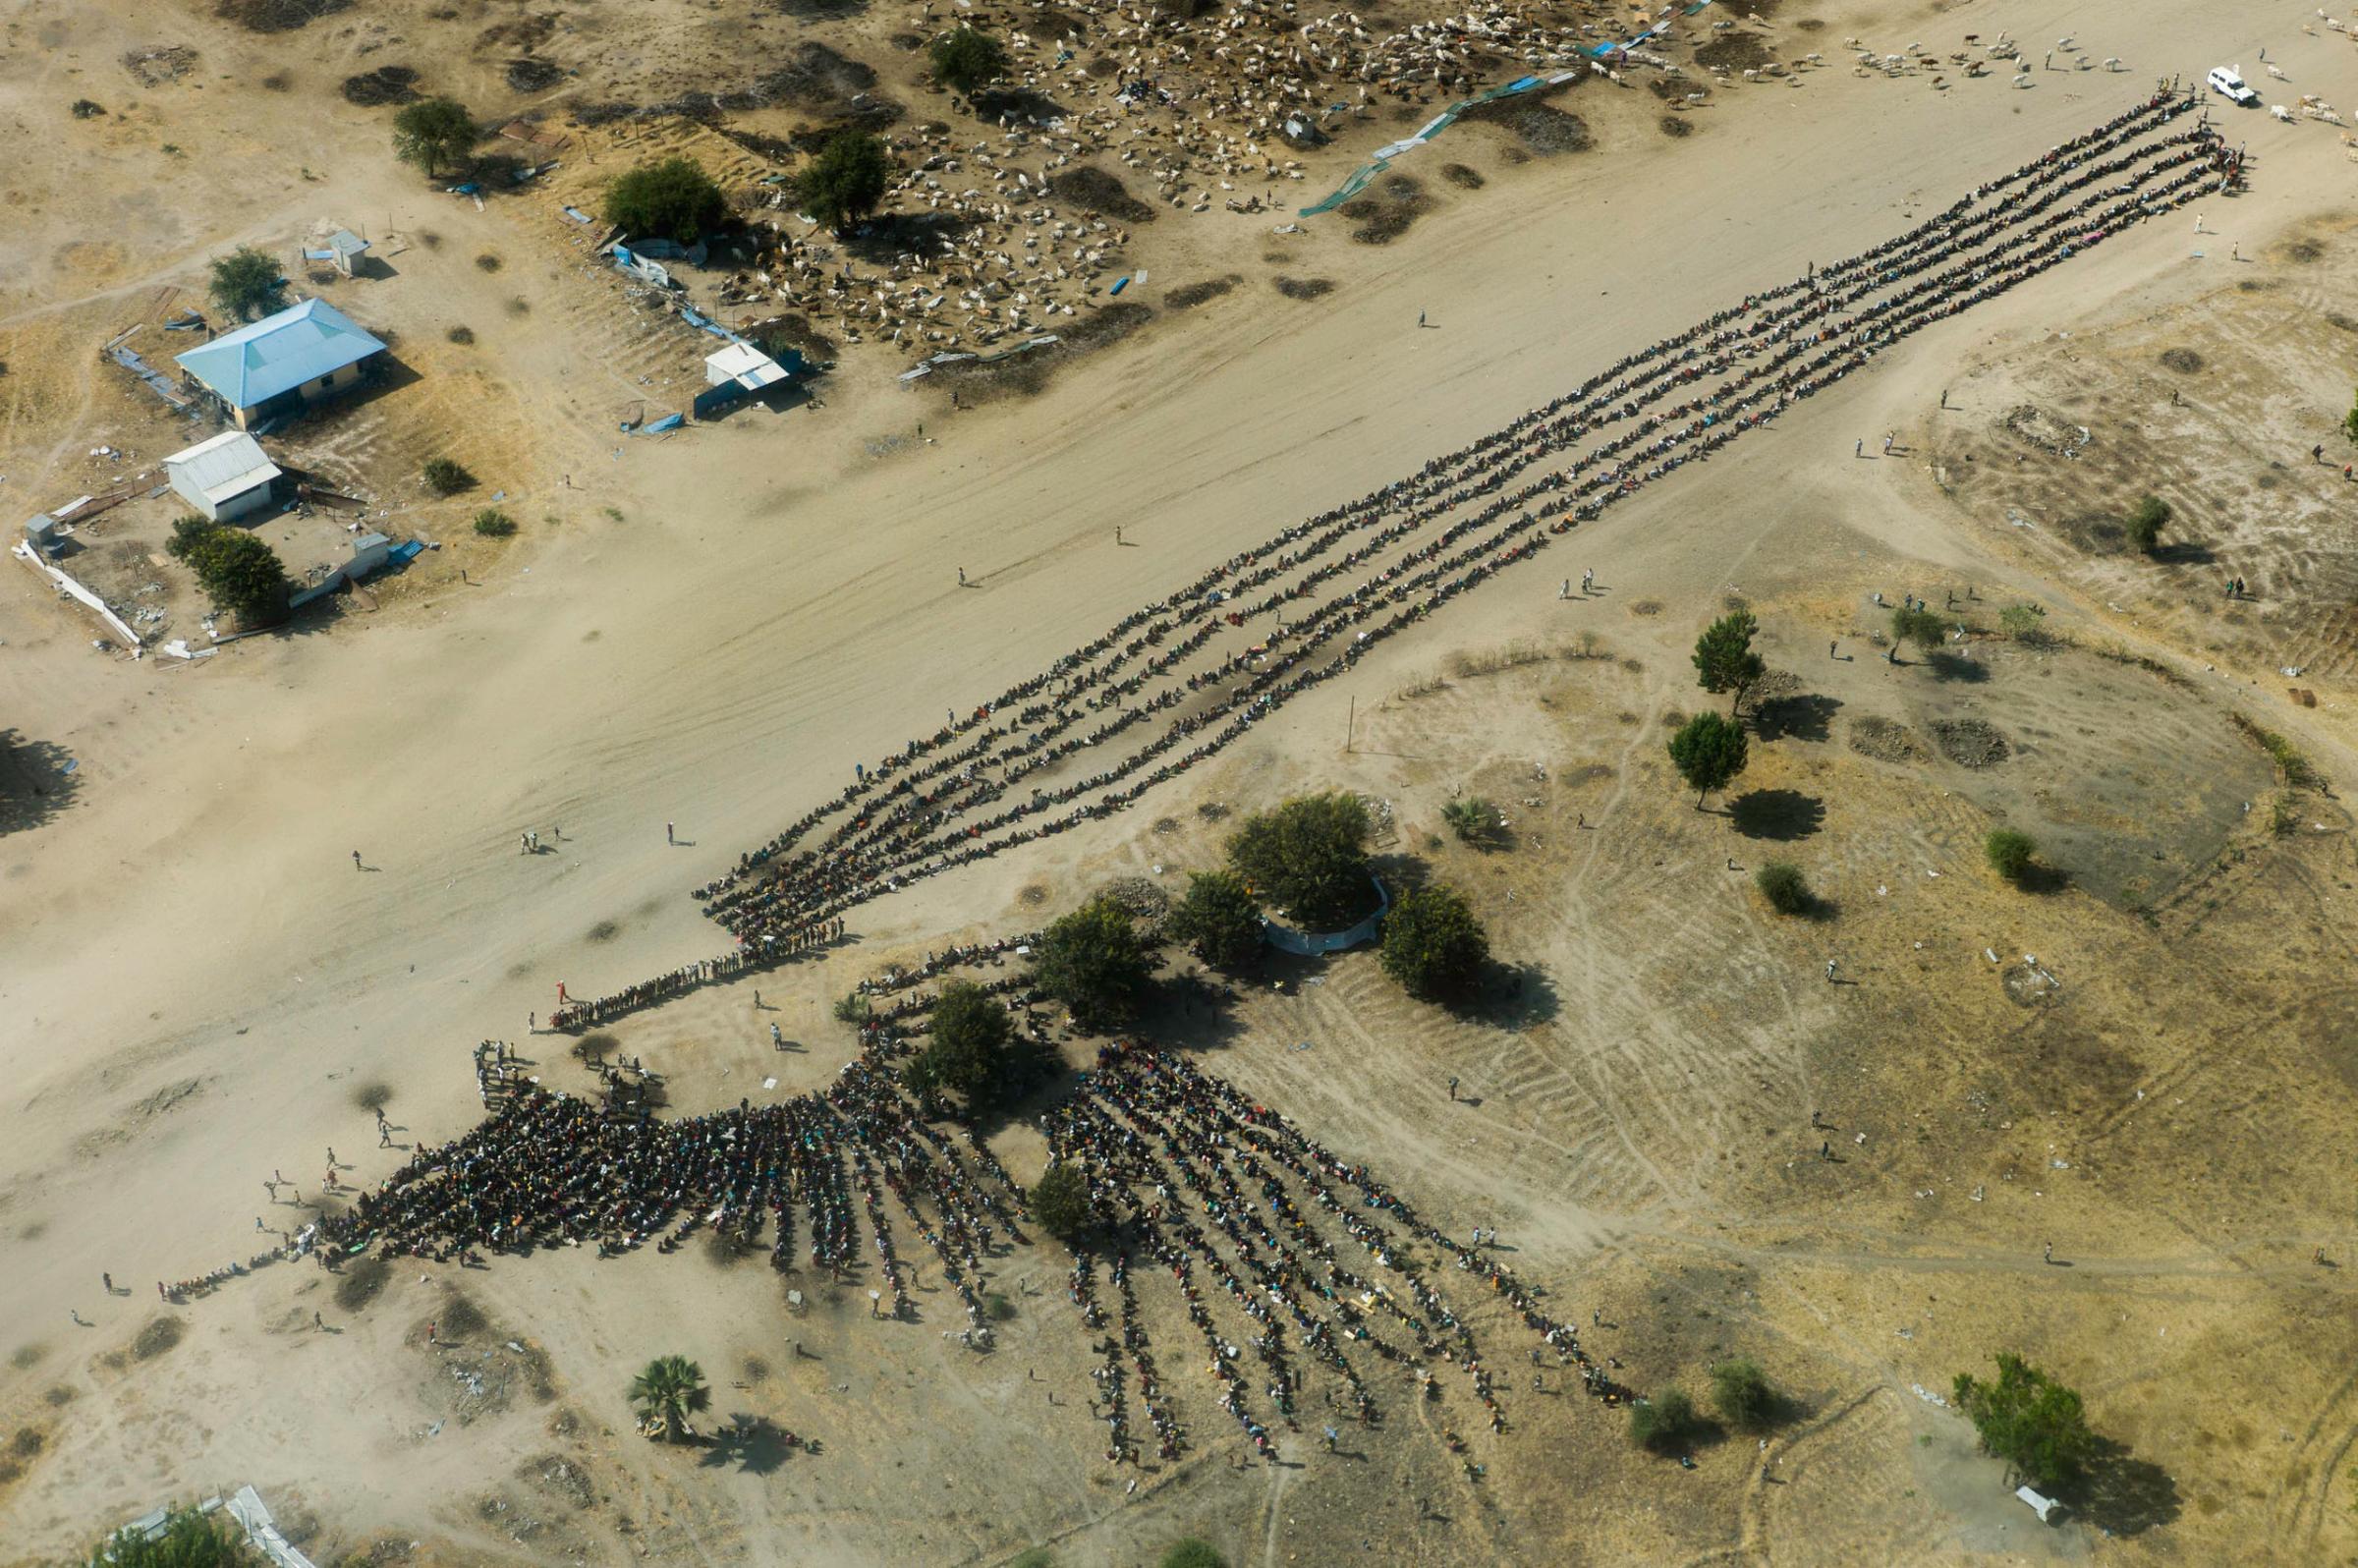 An aerial view of thousands of people waiting in line for food distribution in the otherwise empty and destroyed town of Leer, Unity State, South Sudan.